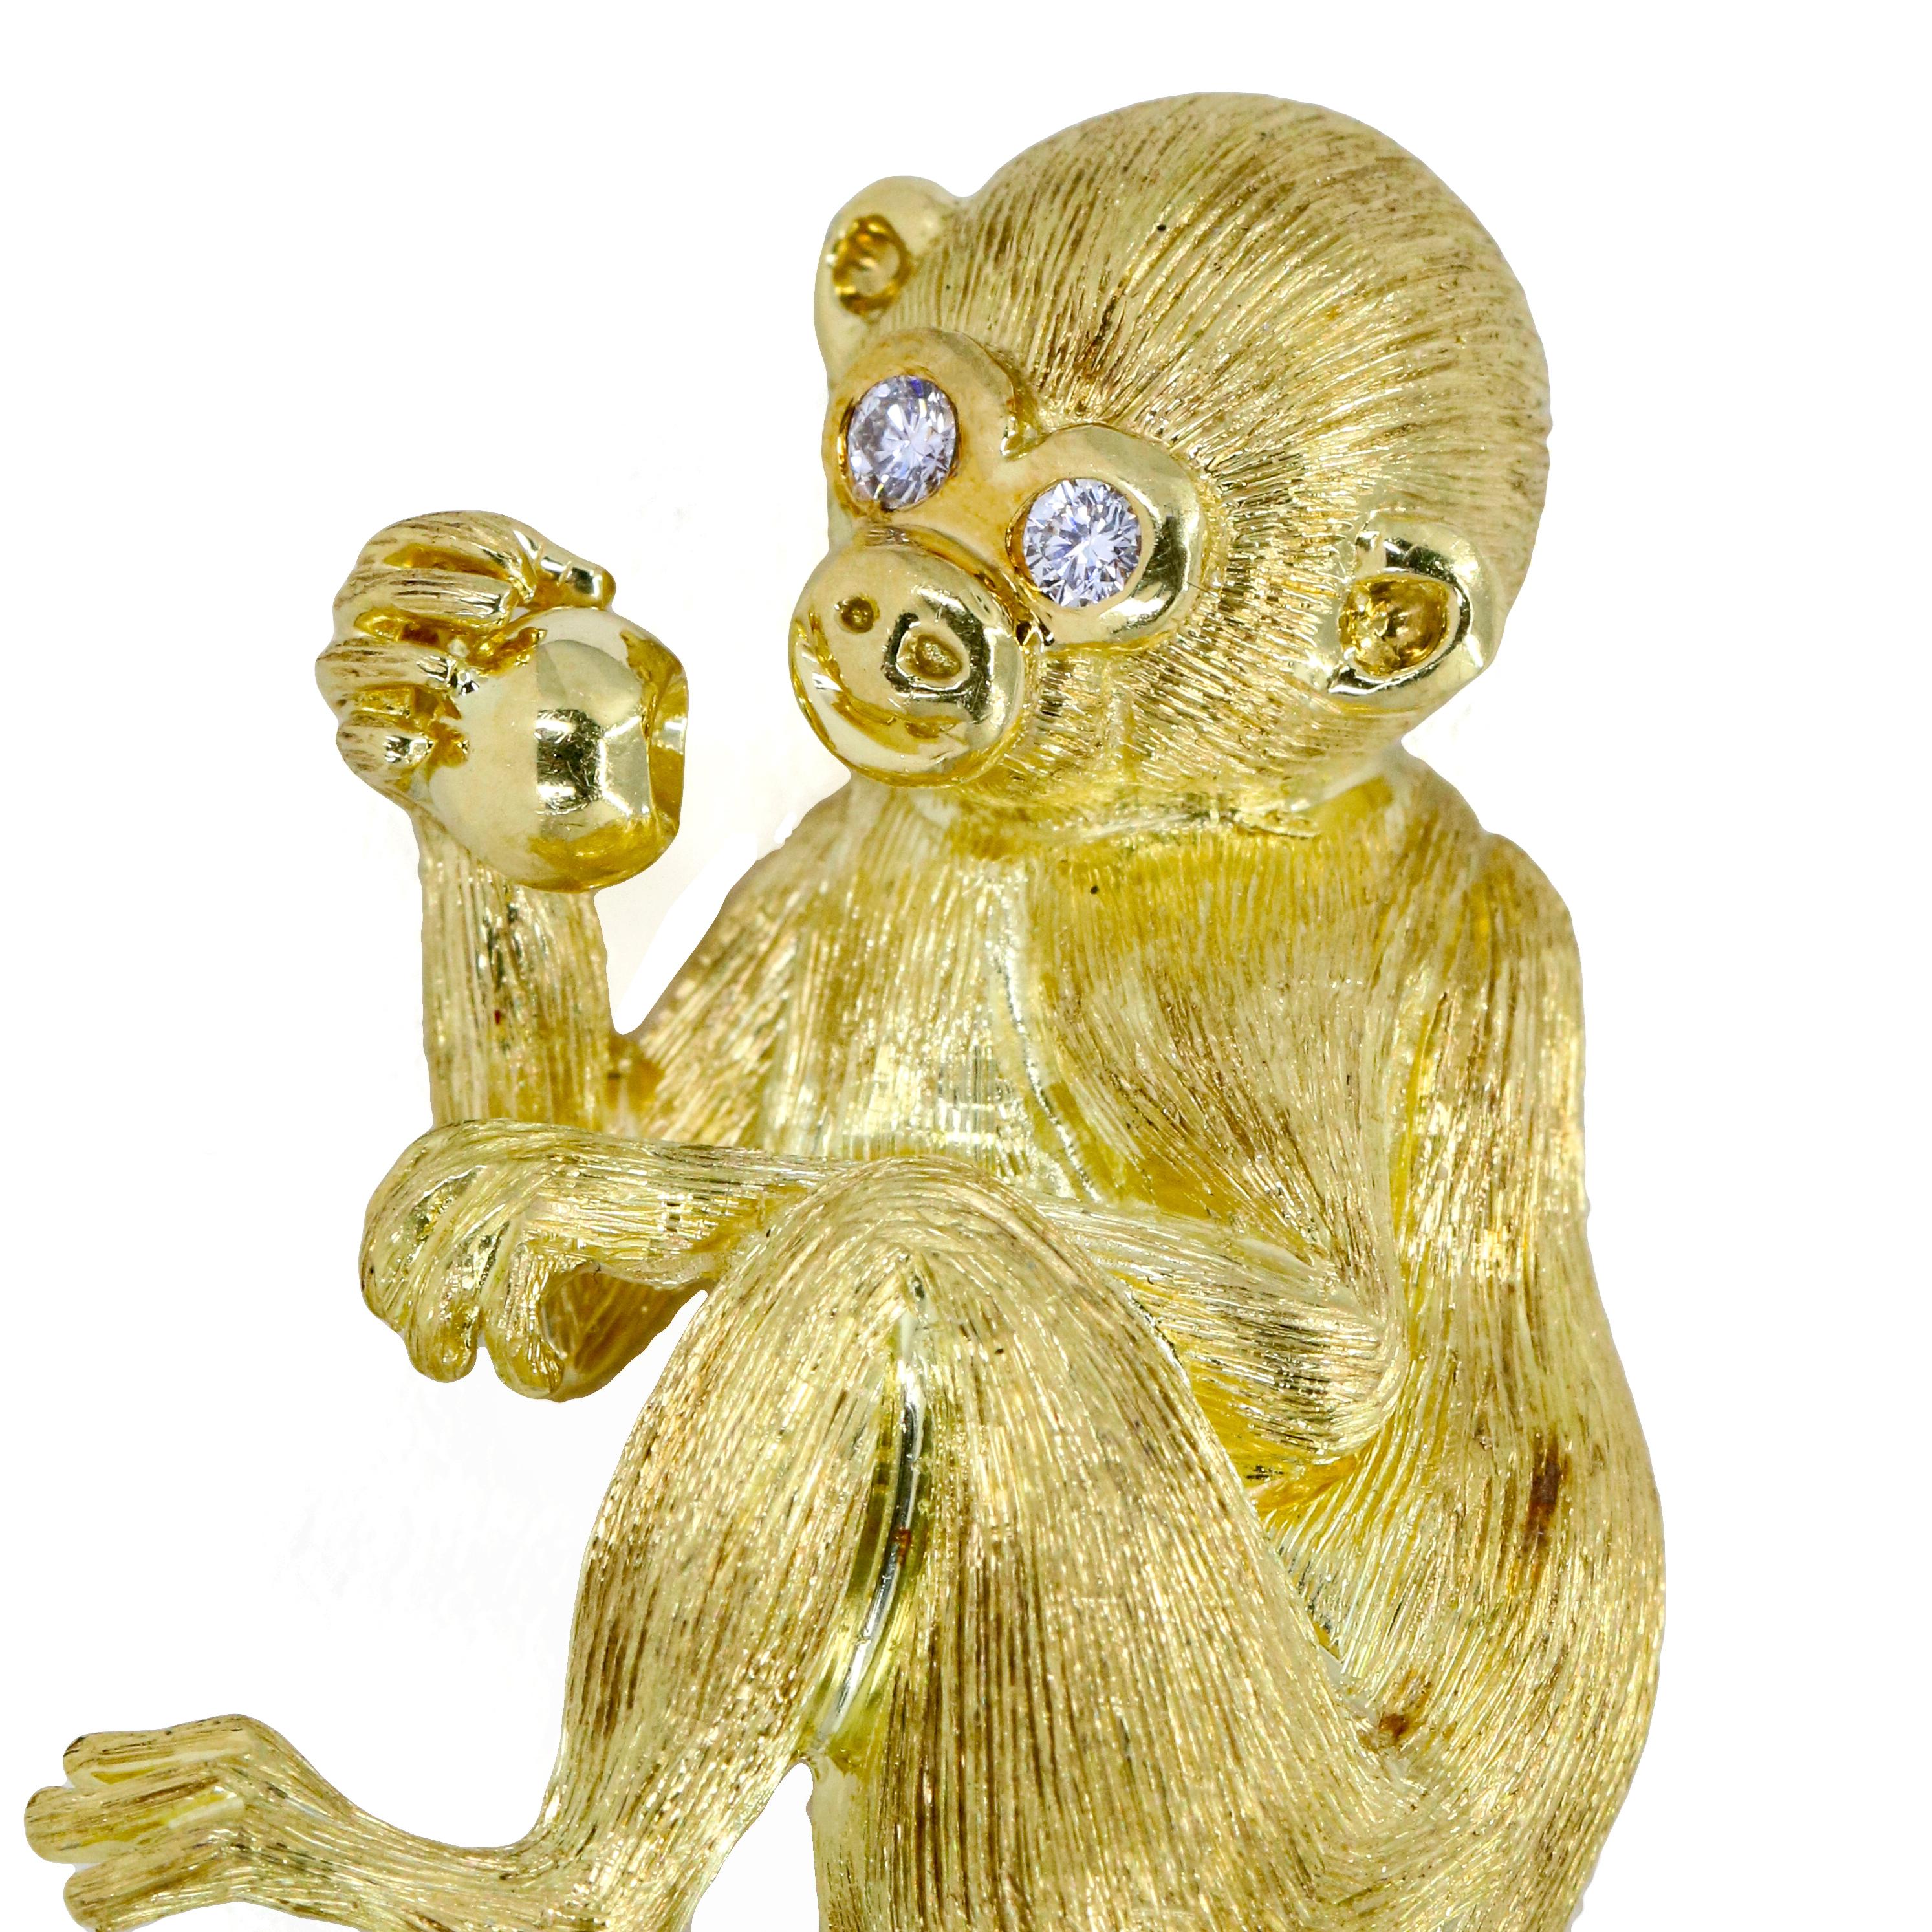 Henry Dunay monkey brooch in 18-karat yellow gold with diamond eyes. 

Length, 52mm
Width, 27mm
Depth, 10mm
Weight, 16.2 grams
Diamond Total Carat Weight, .10 carat 

Previously owned, in excellent condition. Original packaging not included. Cleaned